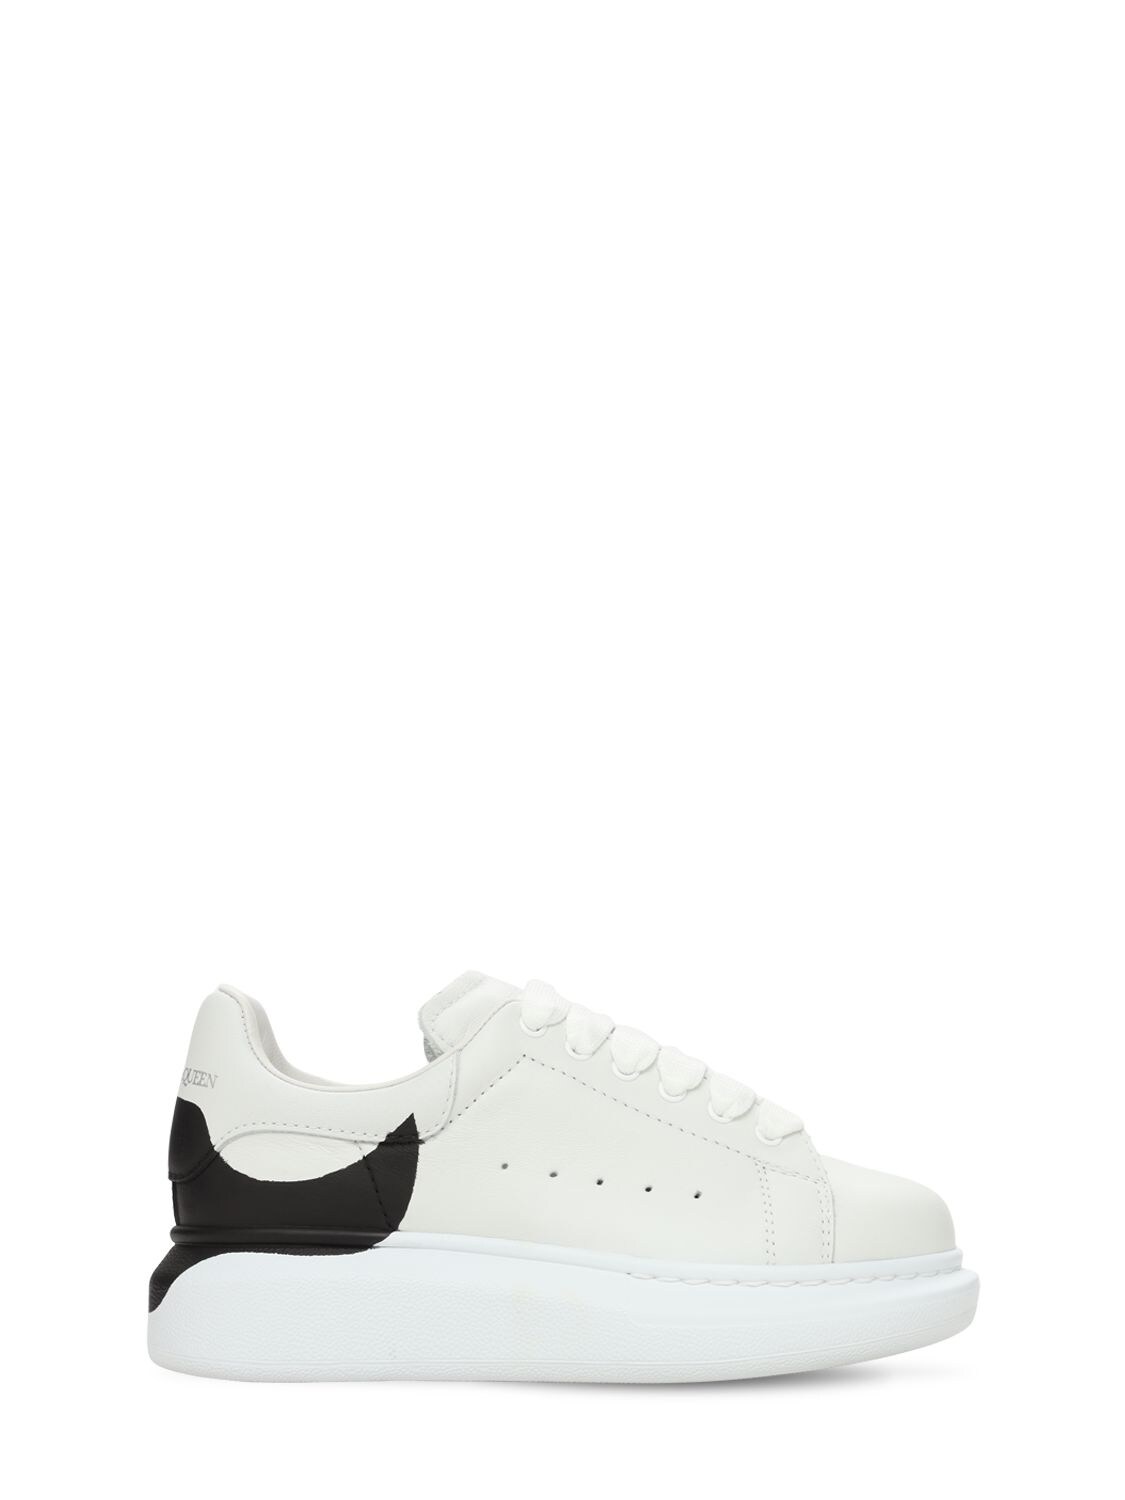 ALEXANDER MCQUEEN LEATHER LACE-UP trainers,73ILXS006-OTA2MQ2